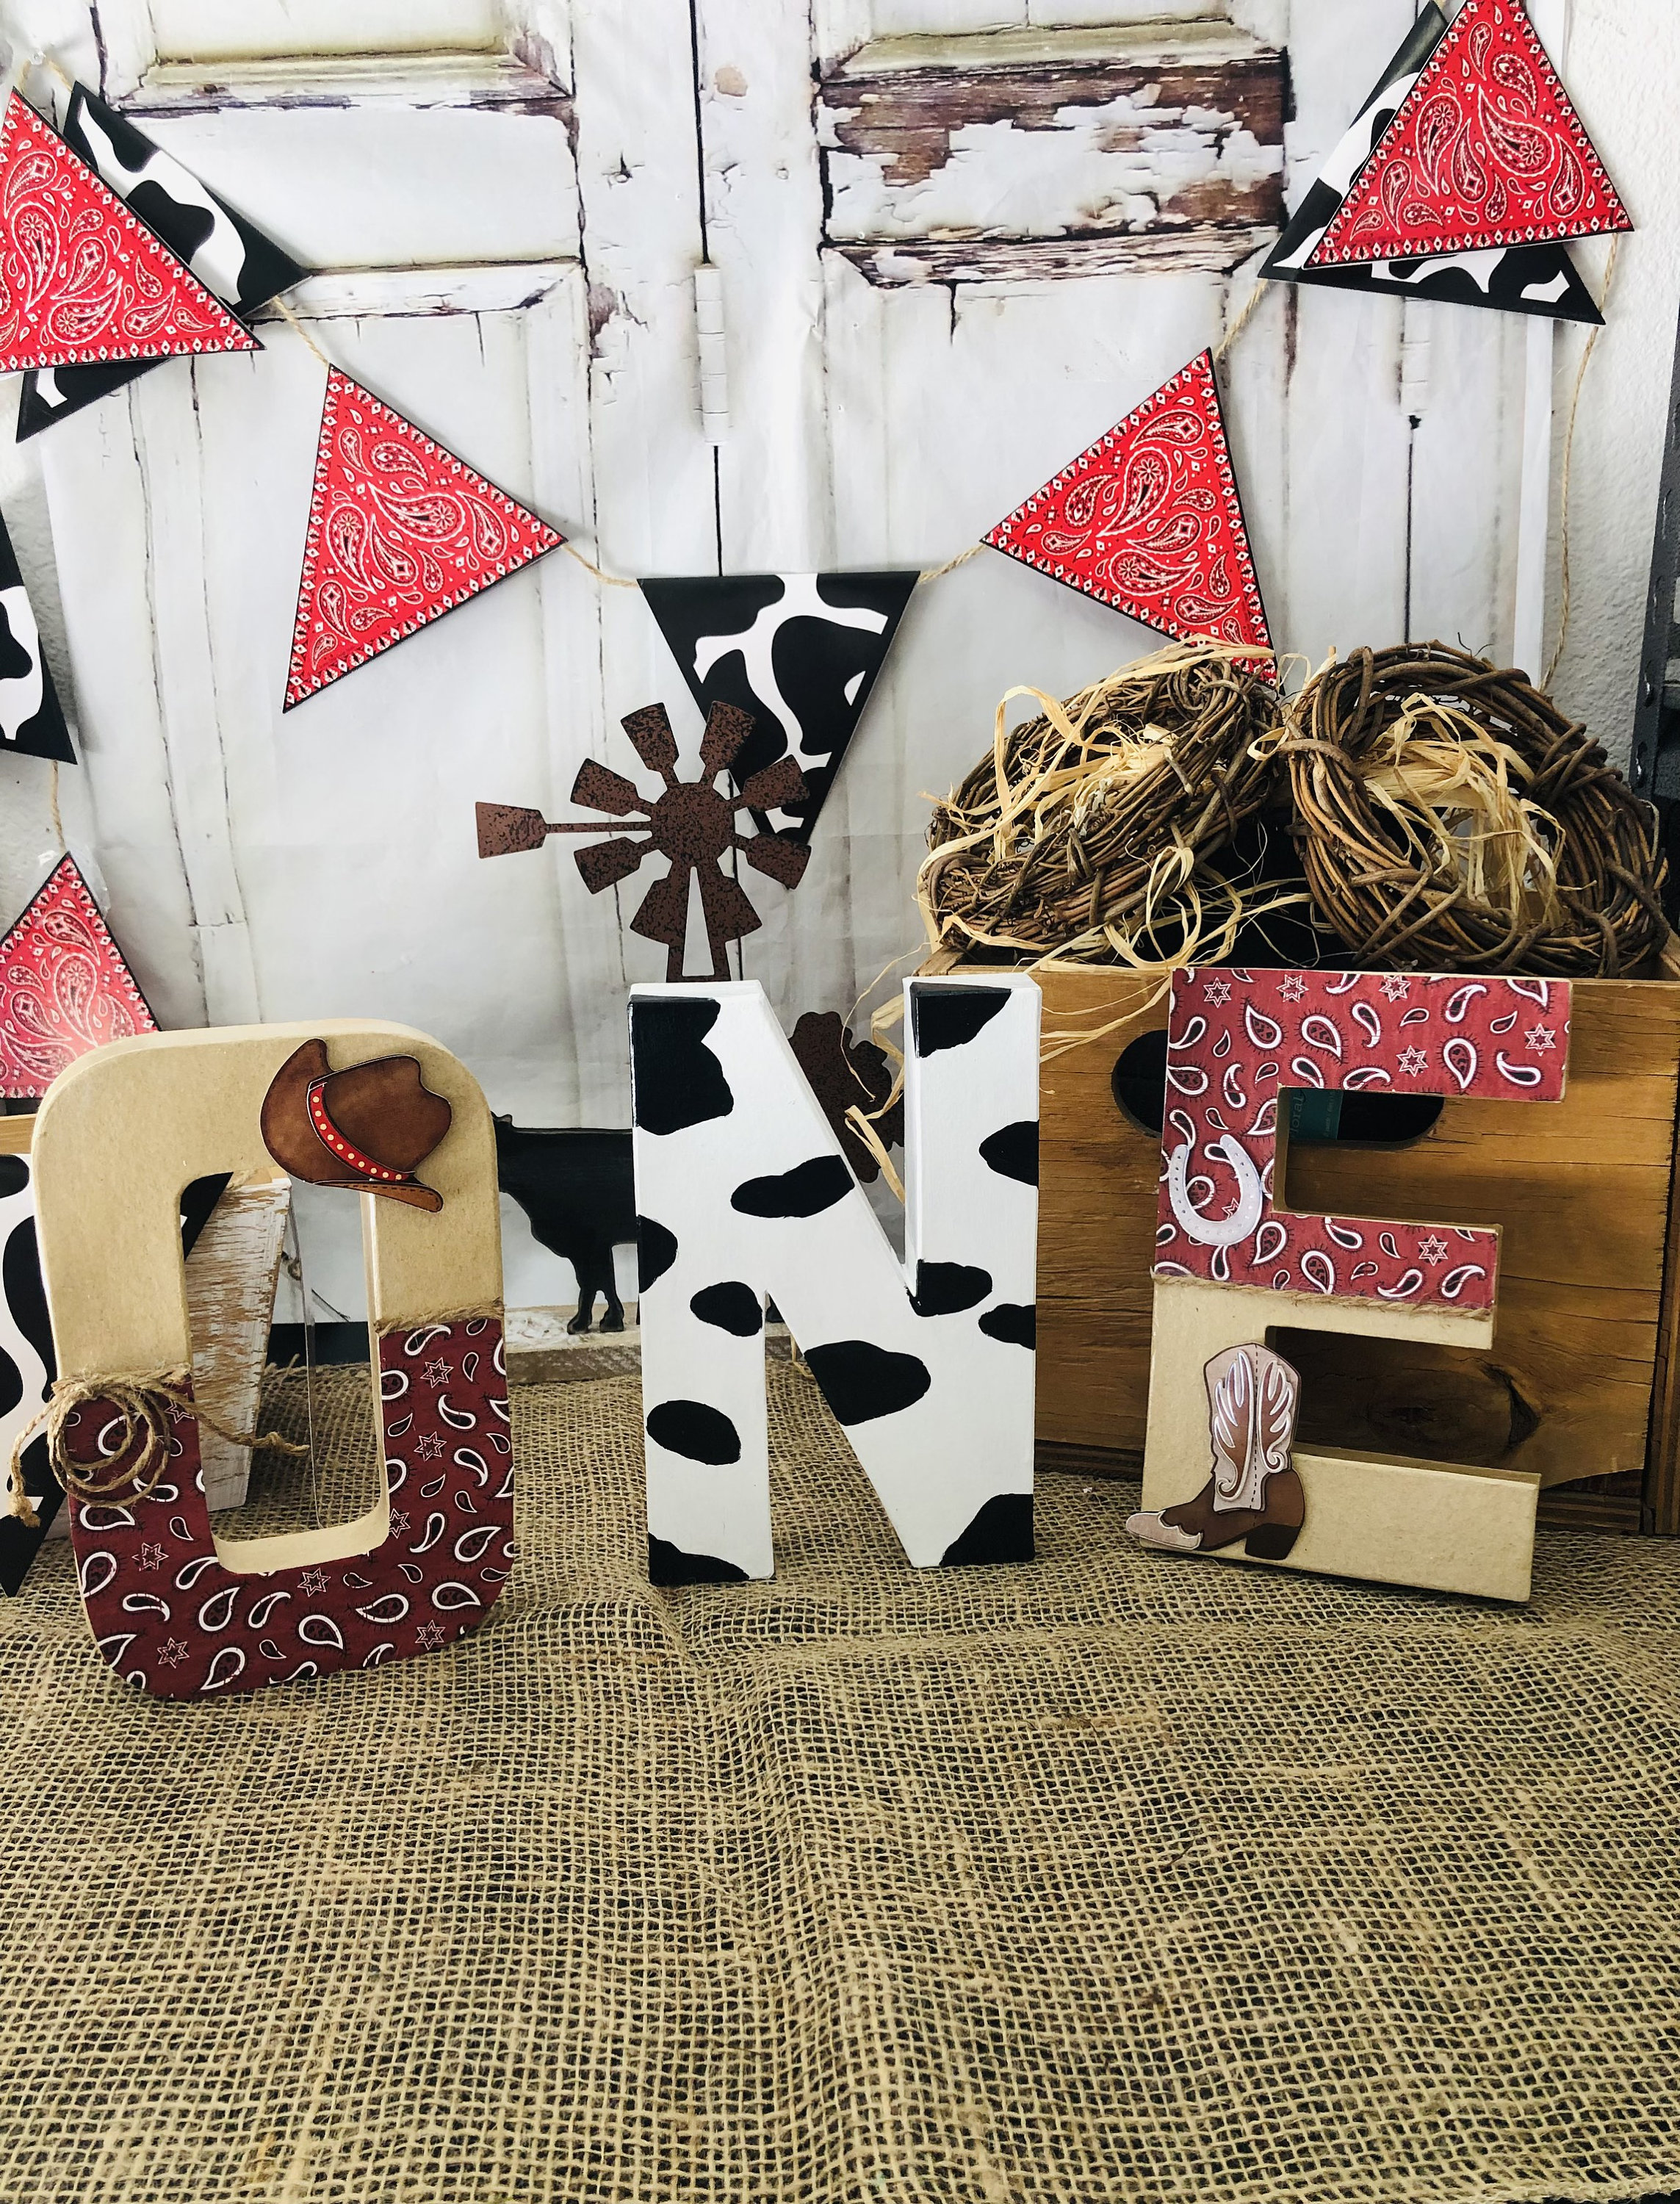 Large 24 Paper Mache Letters Craft DIY Party Supply Photo Shoot